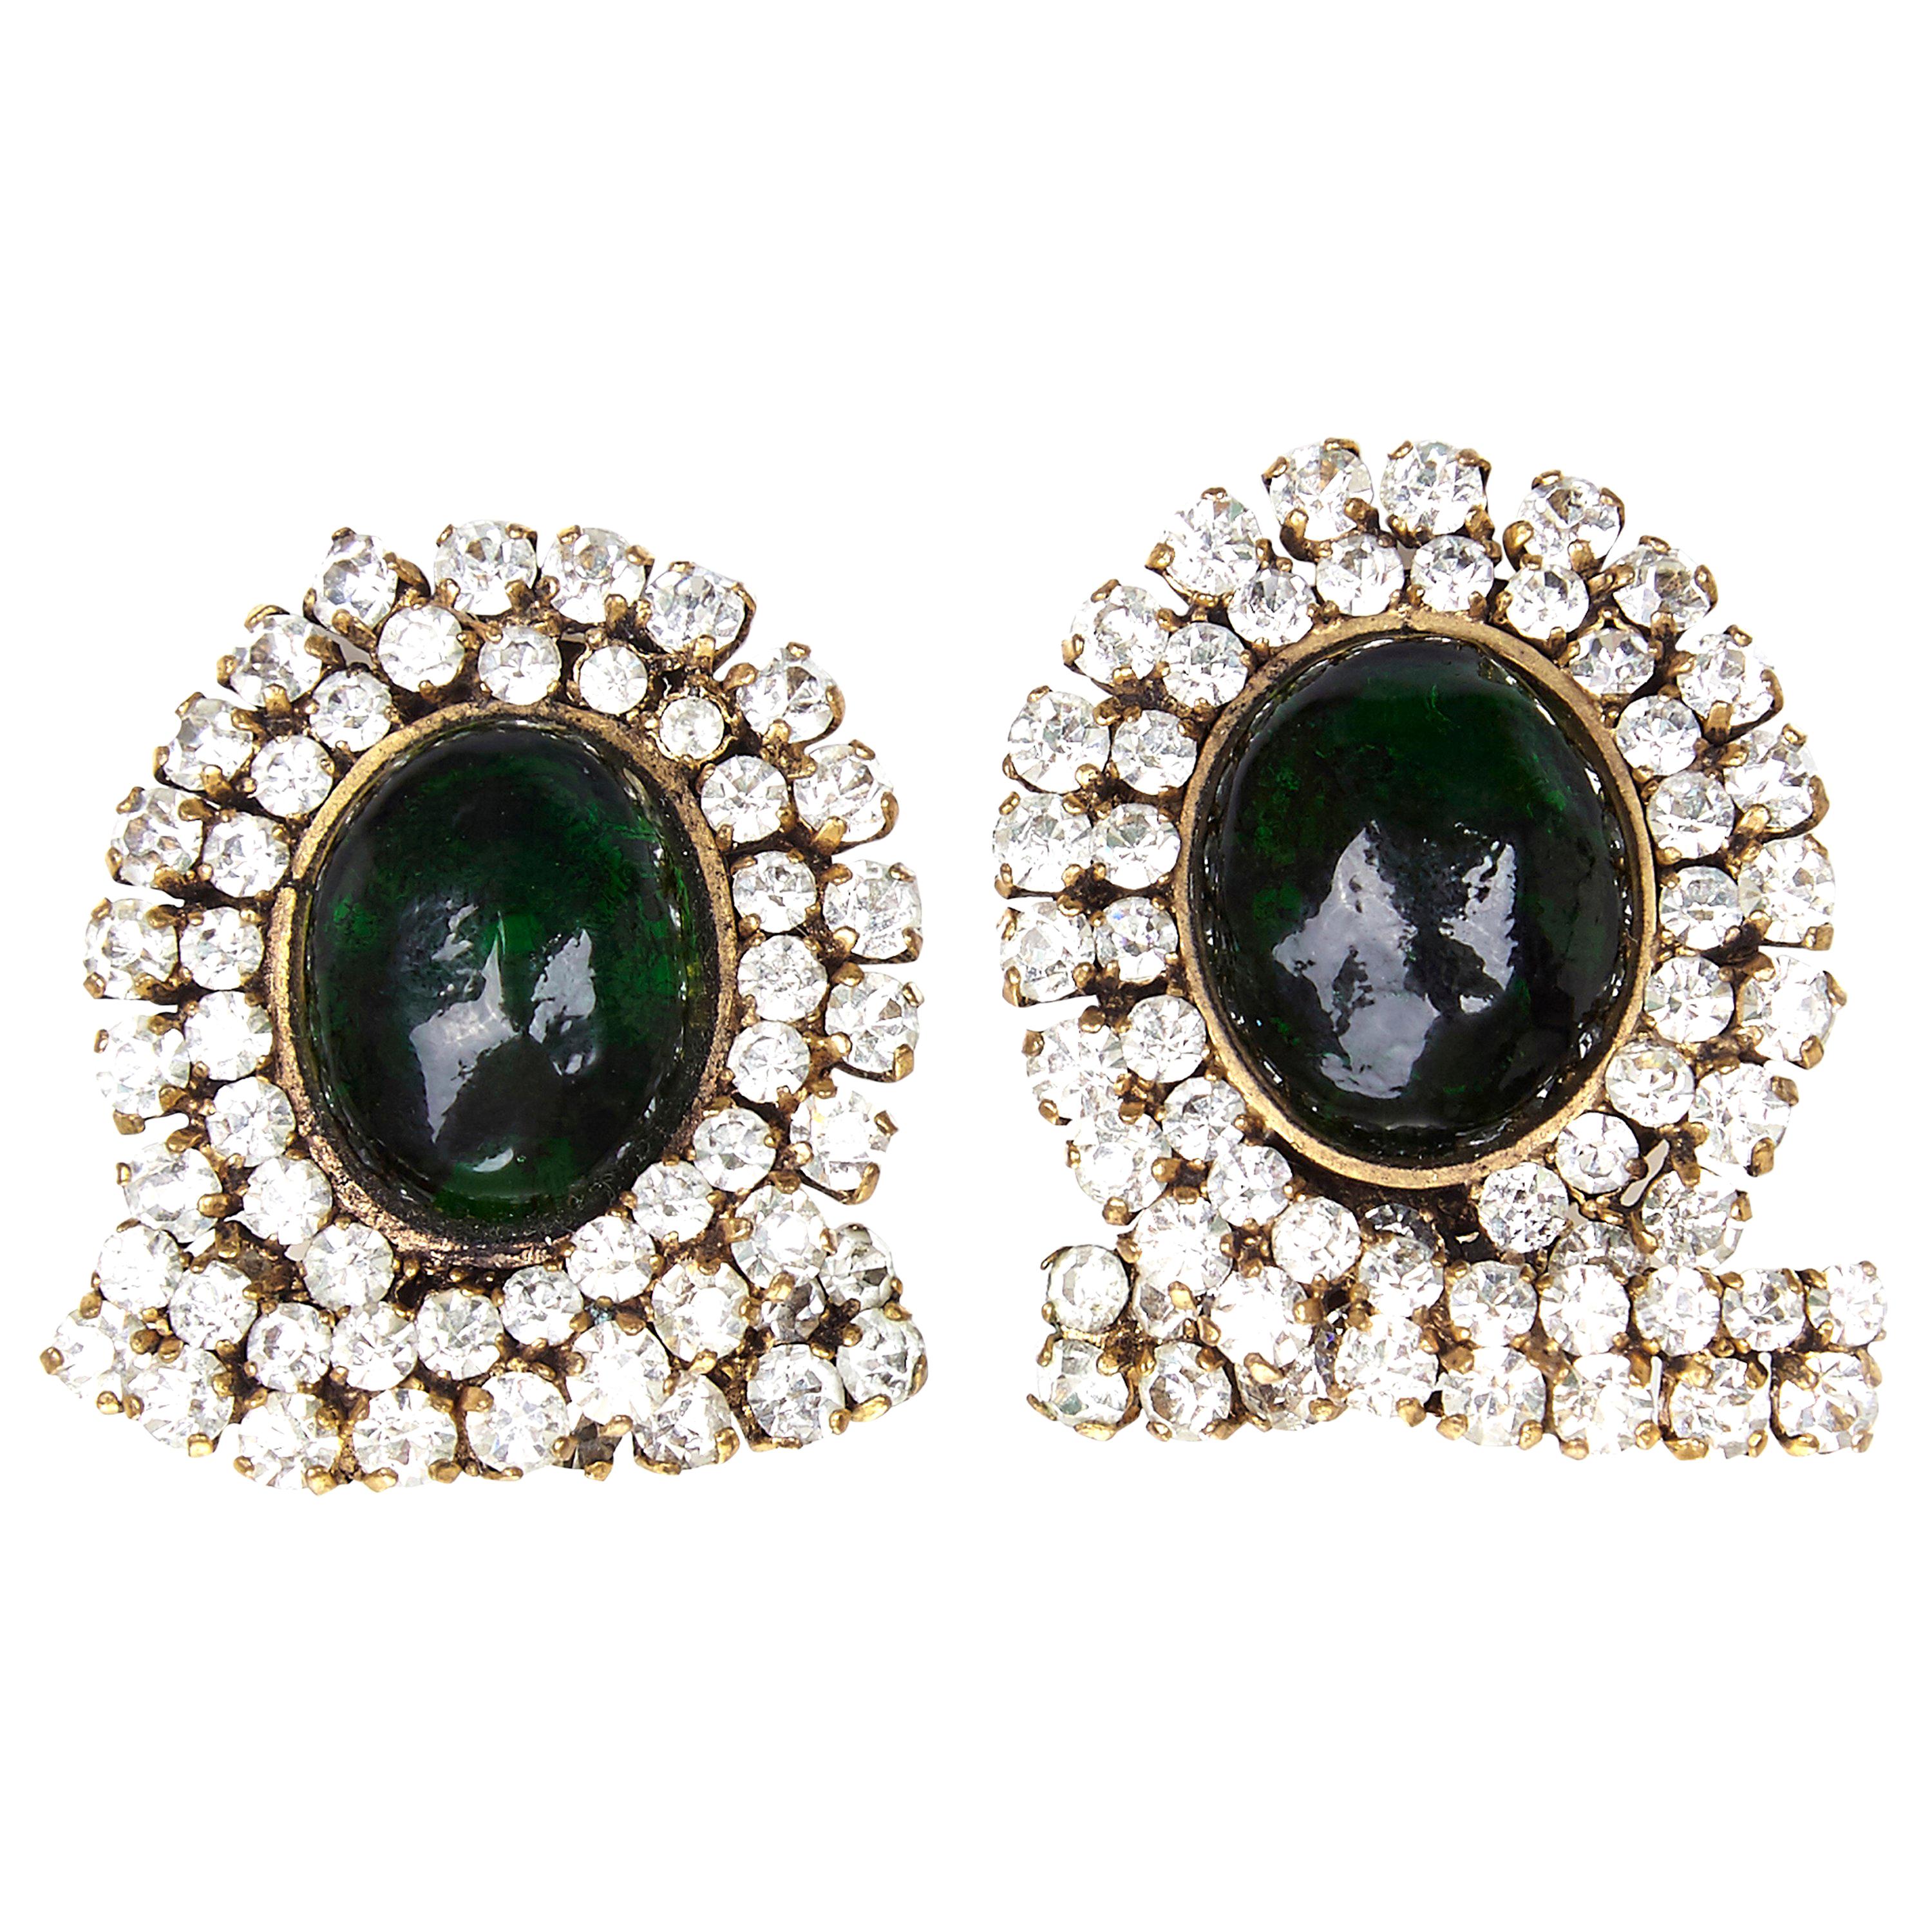 Early and Impressive 1980s Chanel Green Gripoix and Rhinestone Earrings 